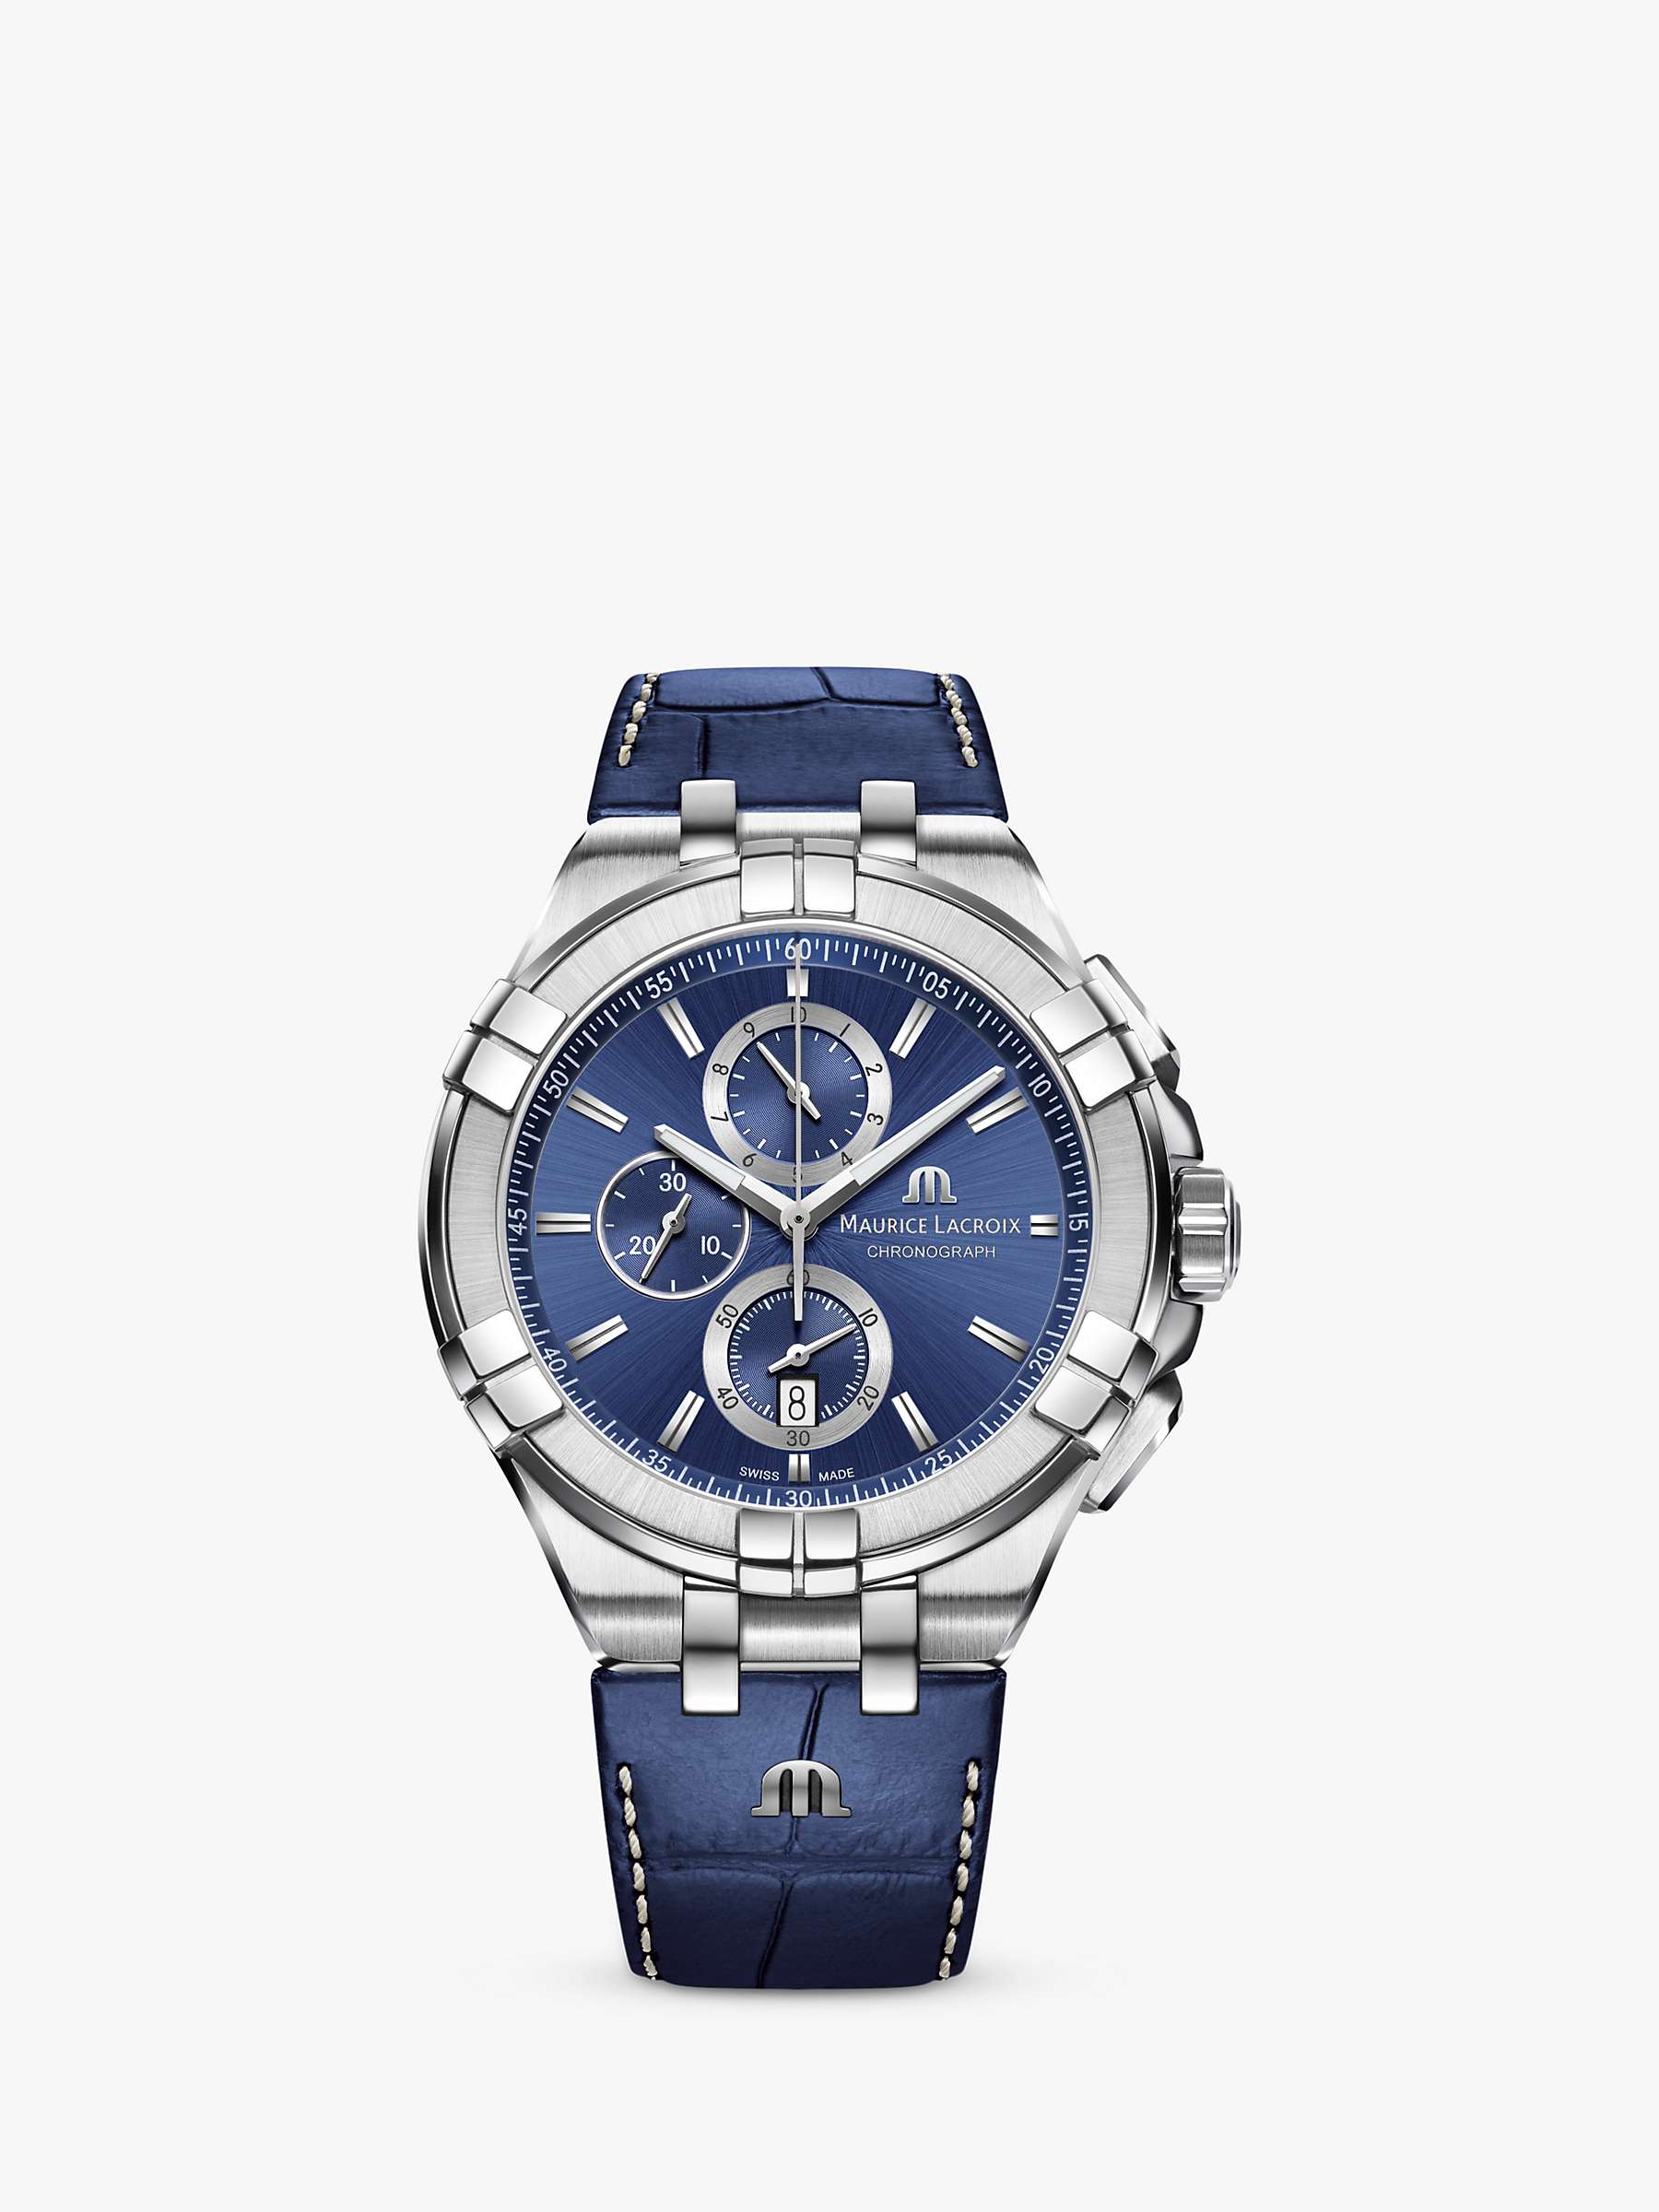 Buy Maurice Lacroix AI1018-SS001-430-1 Men's Aikon Chronograph Leather Strap Watch, Blue/Silver Online at johnlewis.com